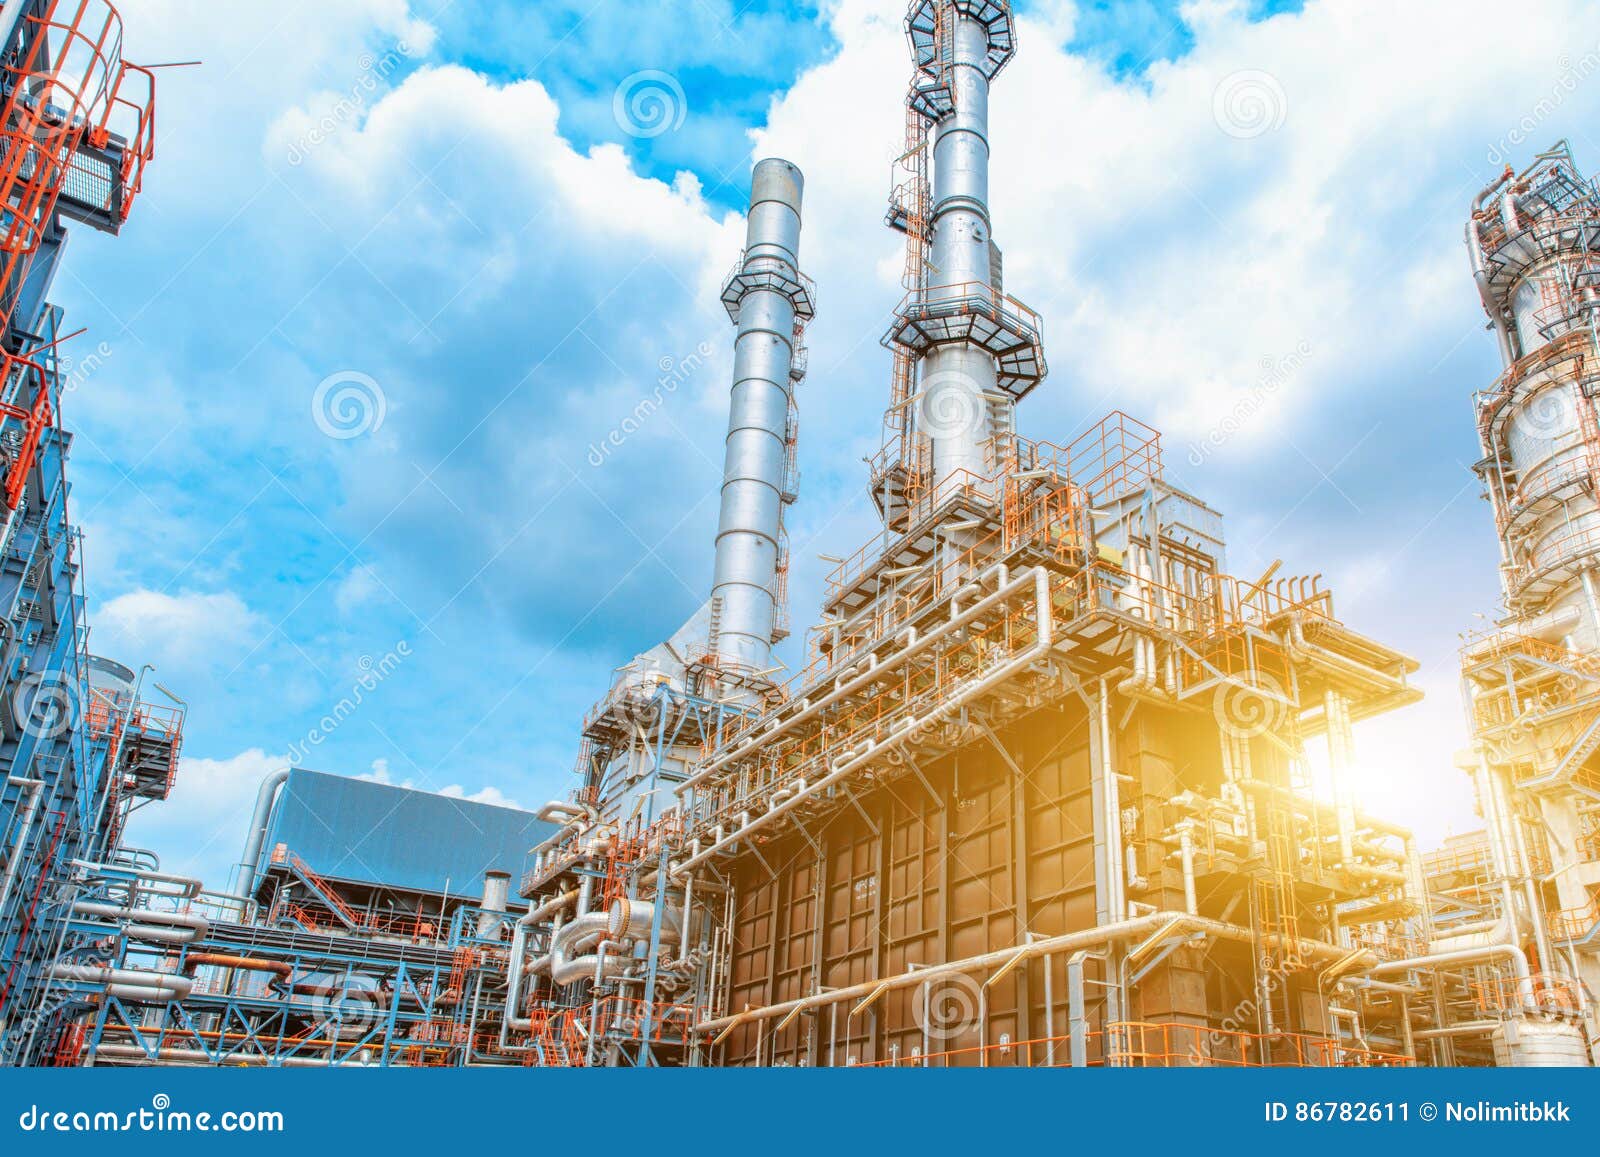 petrochemical oil refinery, refinery oil and gas industry, the equipment of oil refining, close-up of pipelines and petrochemical